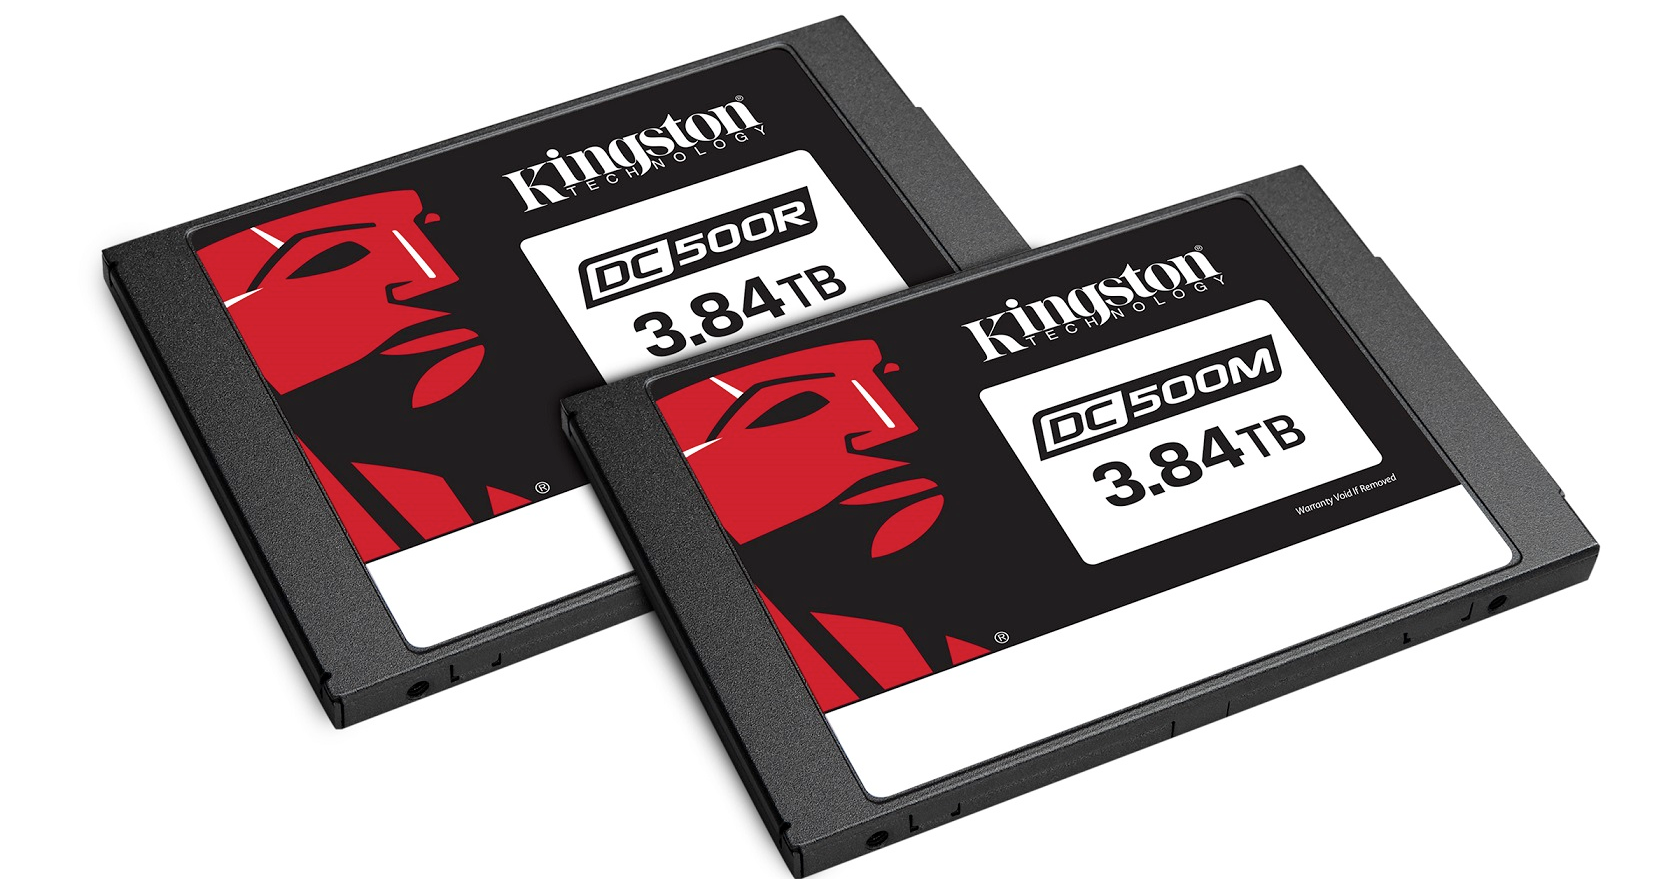 Kingston Technology, , Solid-state drive, Kingston Enterprise SSD DC500R, 480 GB, 6gb, 7mm, Kingston Enterprise SSD DC500M, Computer data storage, Serial ATA, kingston dc500r, Memory card, Technology, Electronic device, Flash memory, Computer data storage, Electronics accessory, Paper product